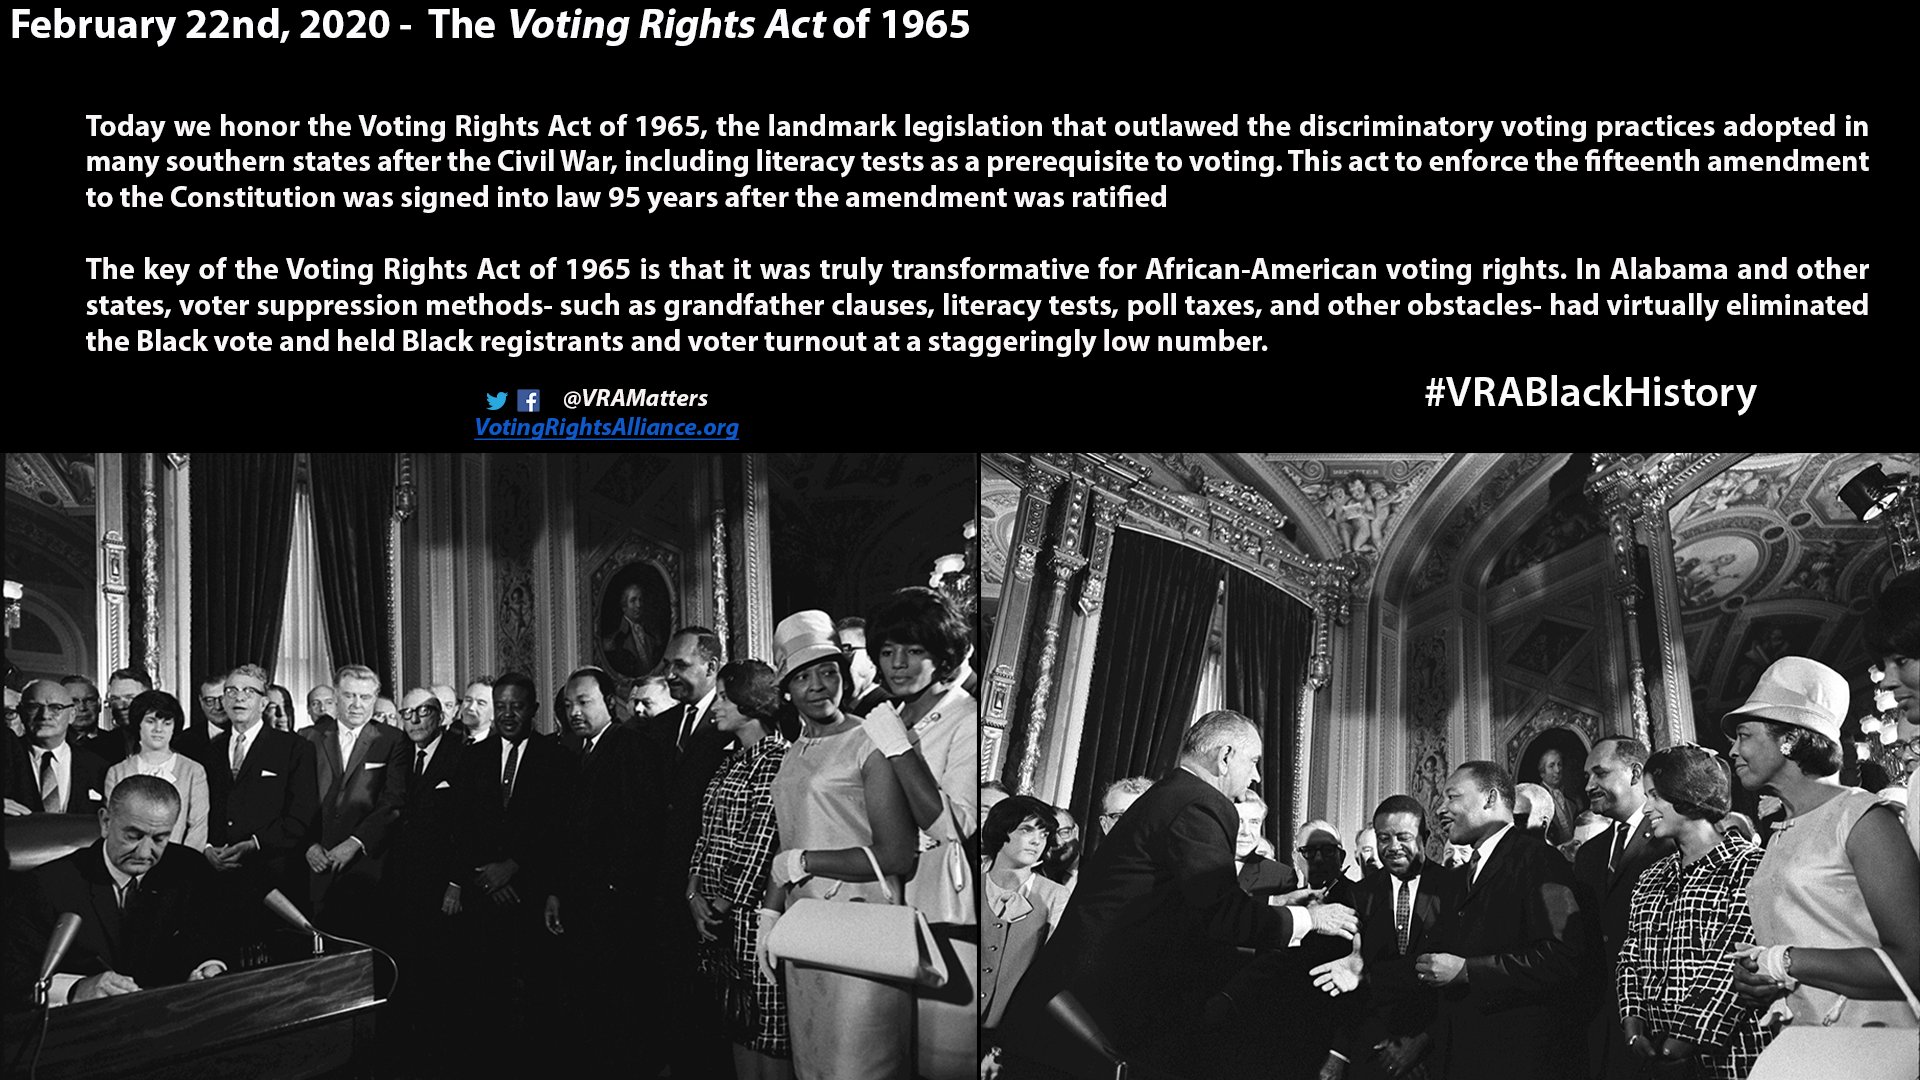 February 22 - The Voting Rights Act of 1965  